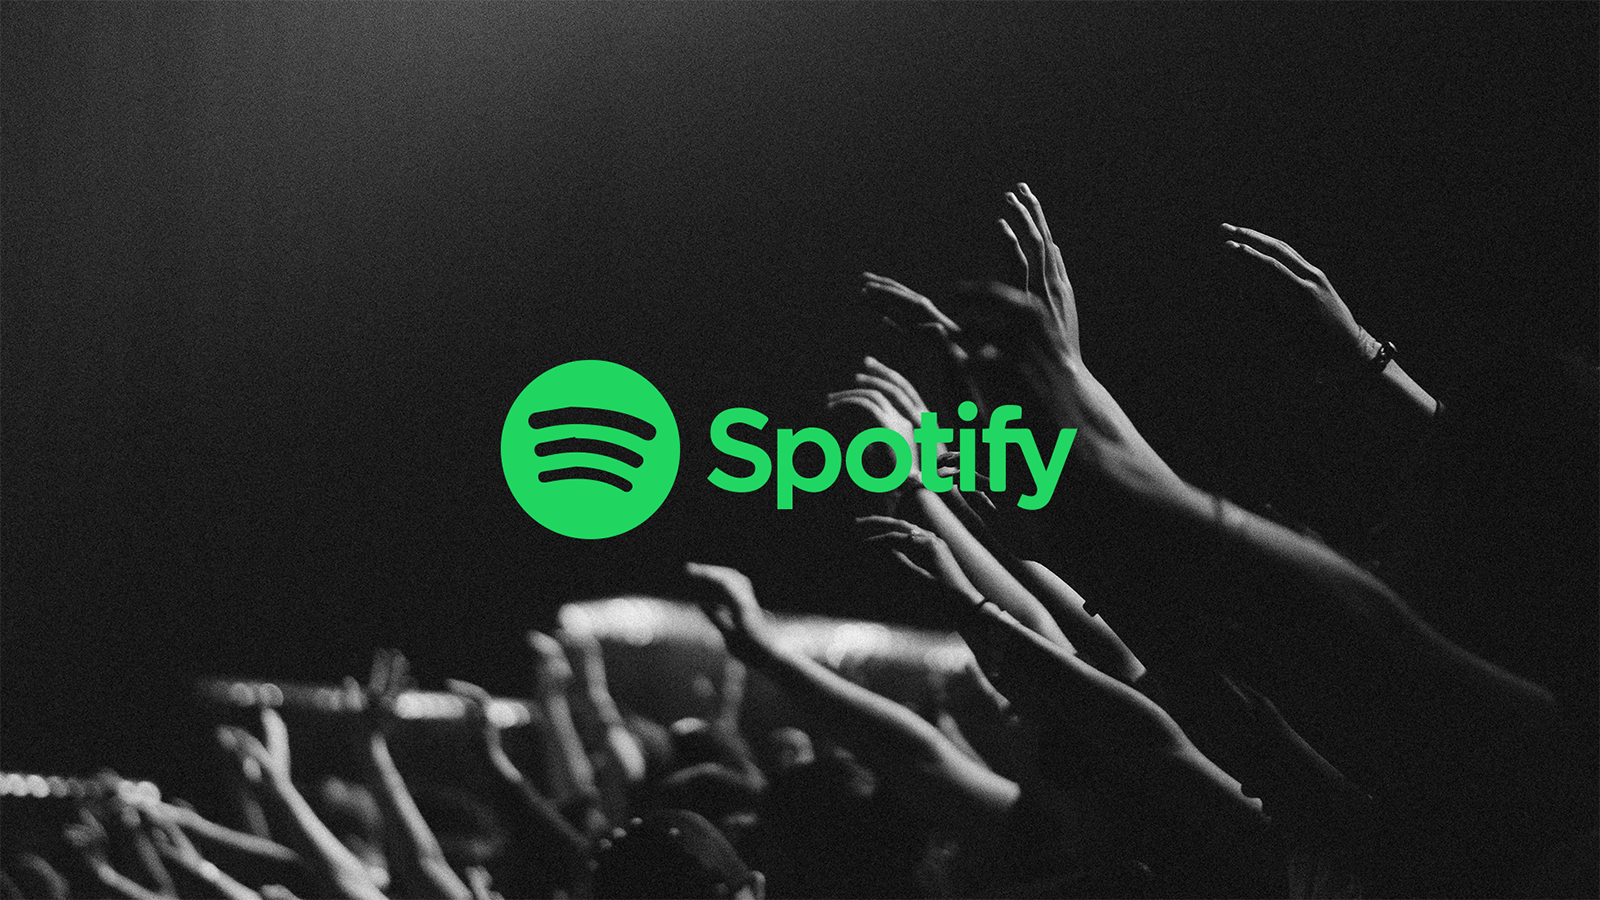 Spotify Social Concept Product Design